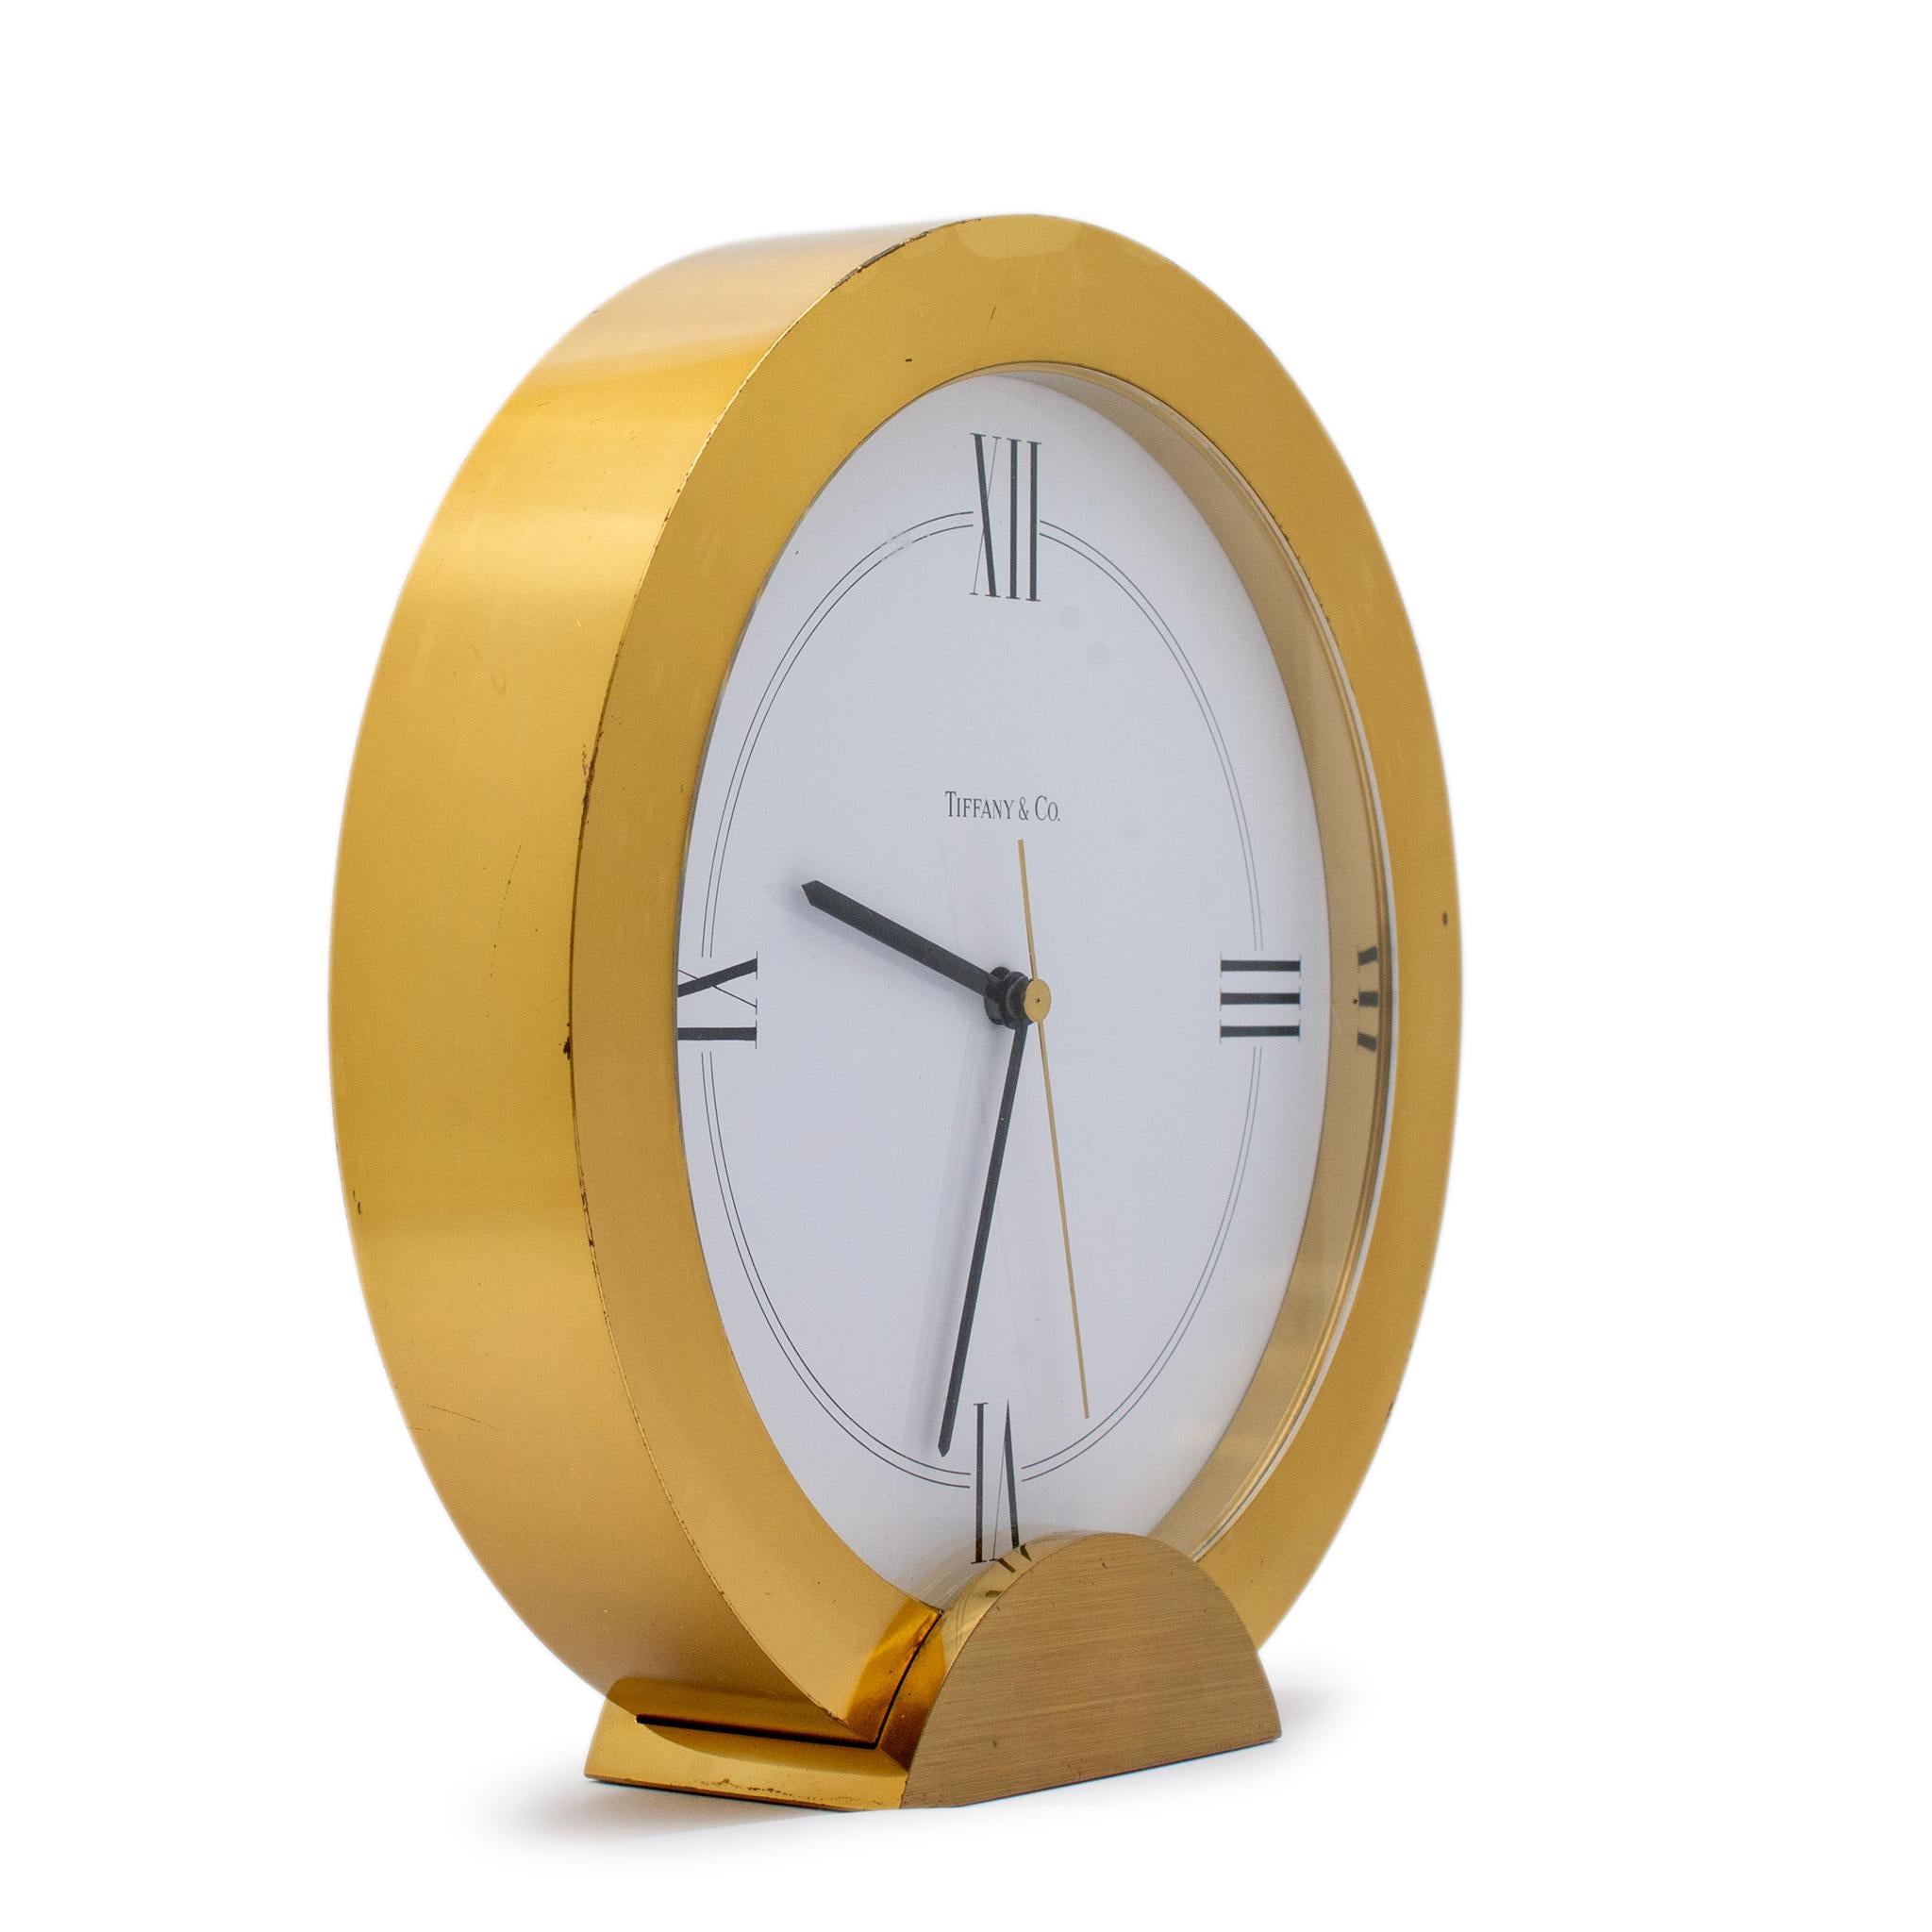 Brand: Tiffany & Co.

Material: Brass

Diameter: 6.25 Inches

Weight: 1701.30 grams

Swiss made table clock. The 